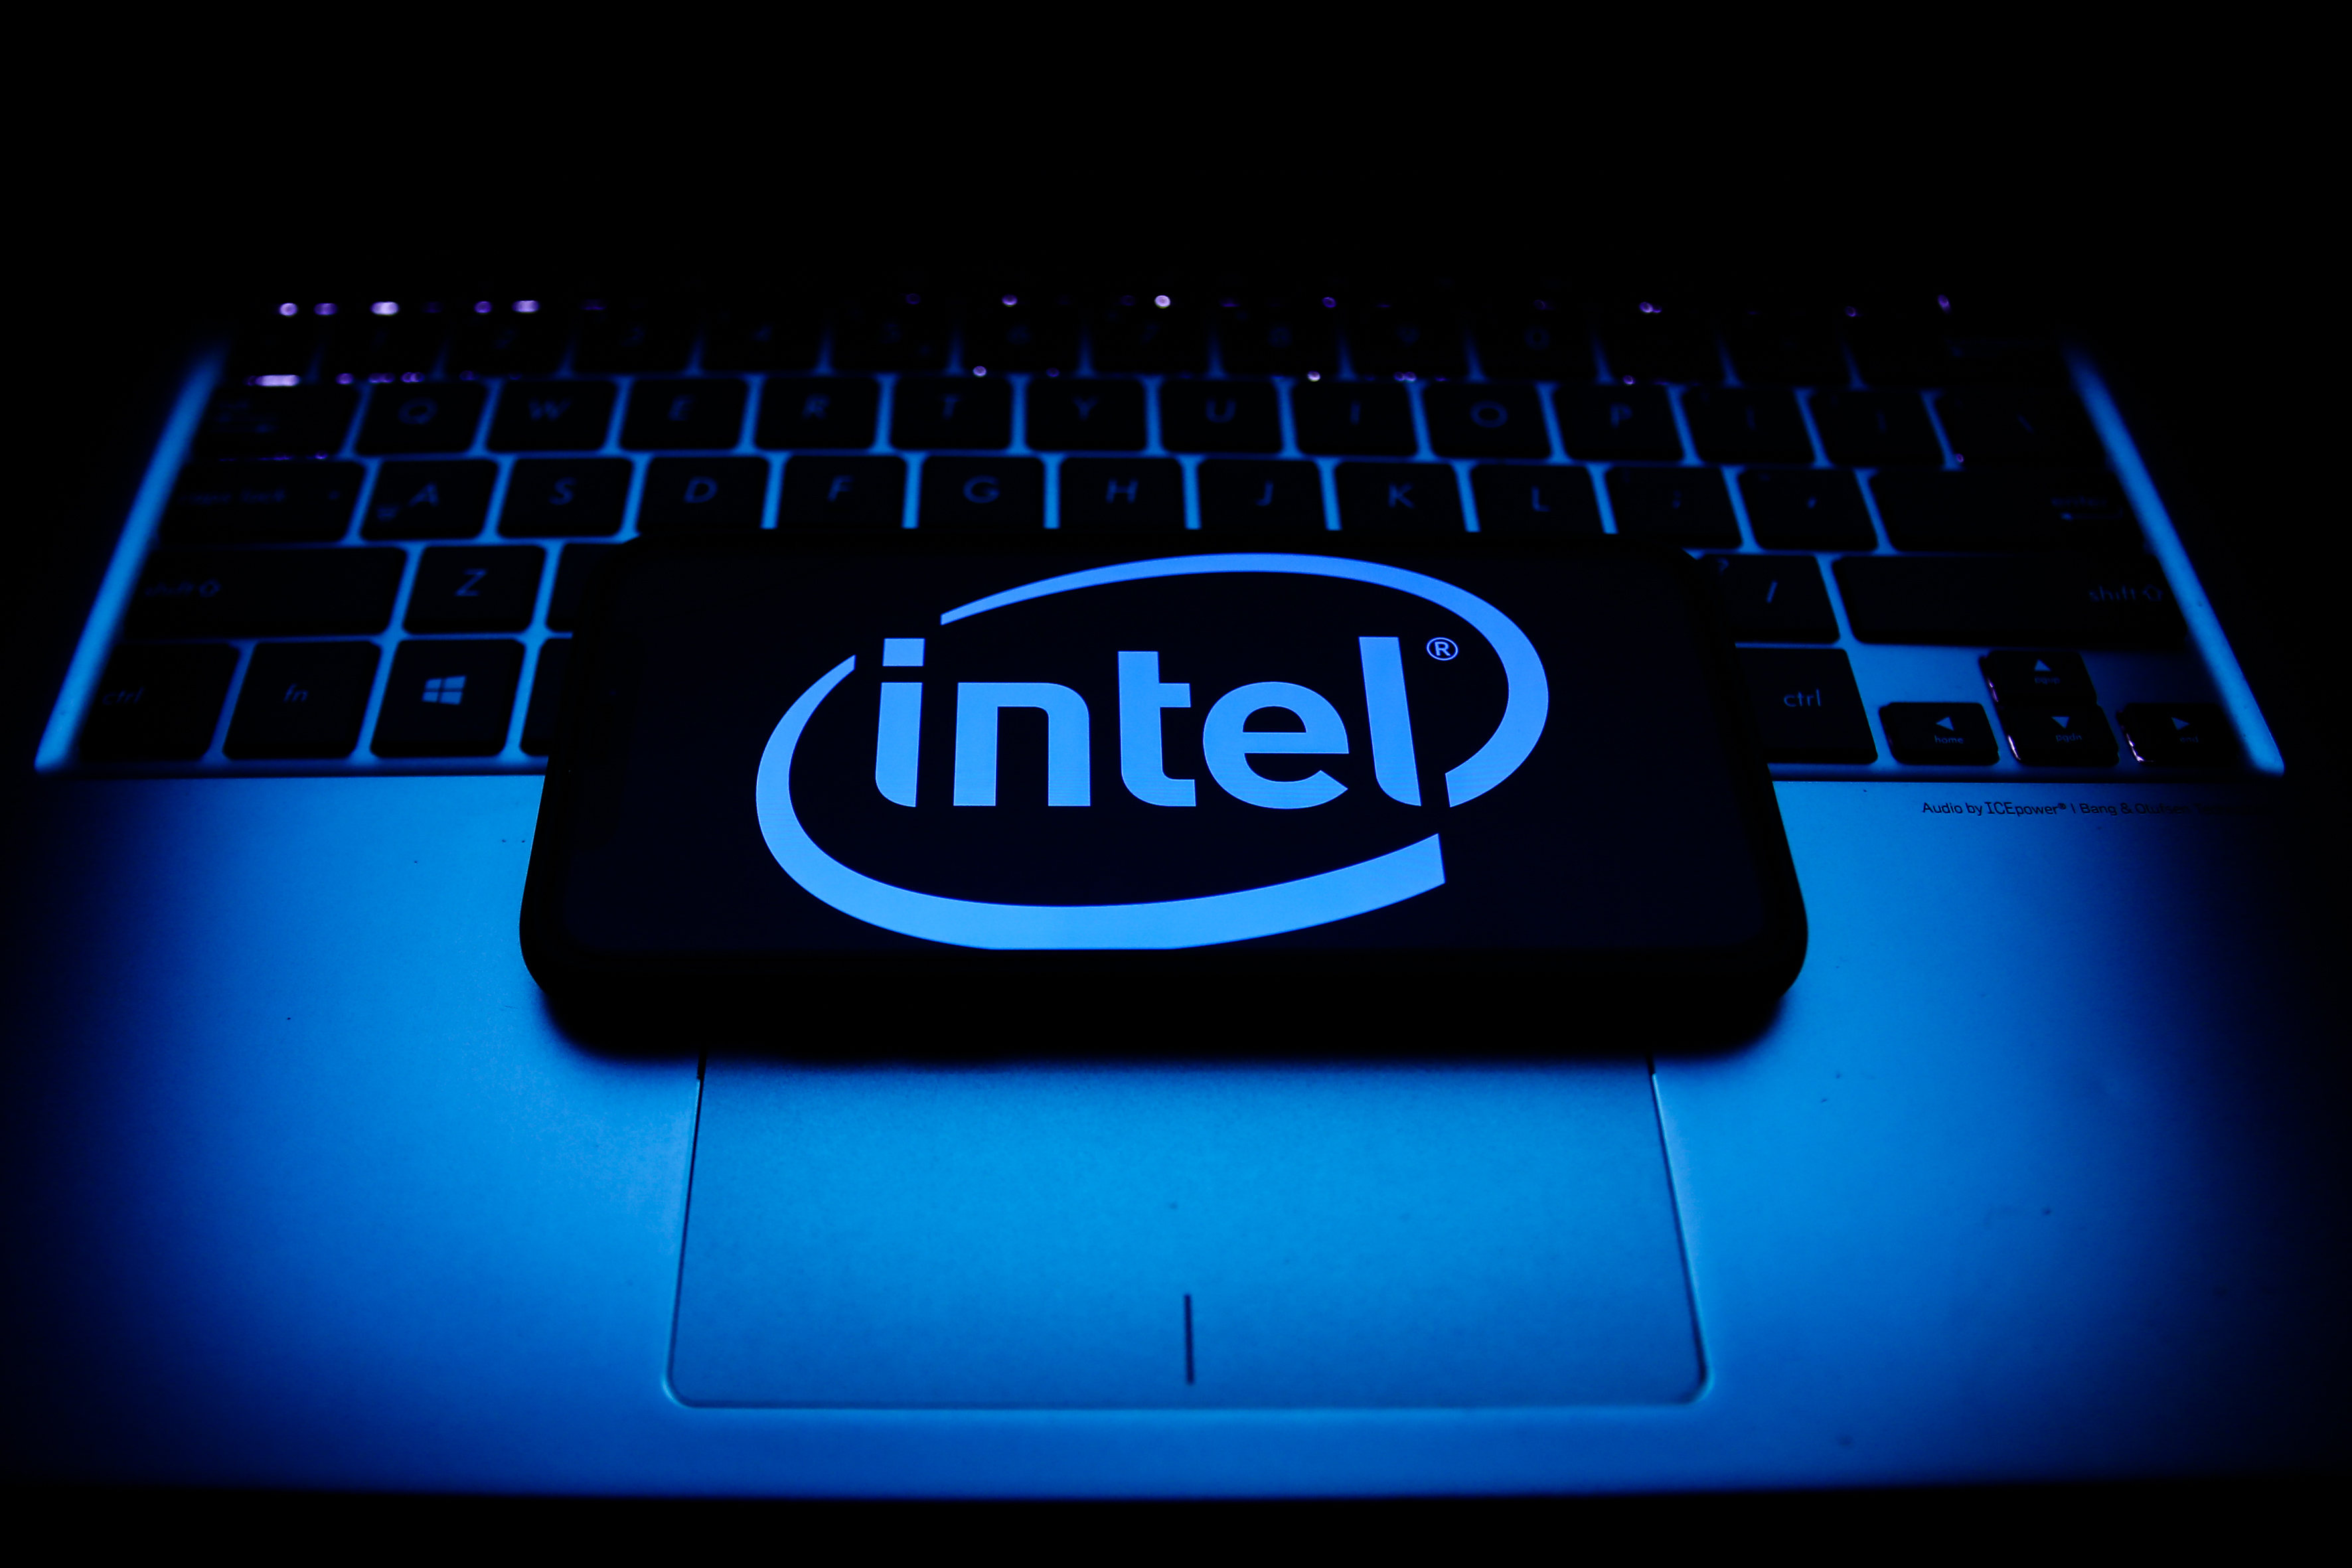 Intel logo displayed on a phone screen and a laptop keyboard are seen in this illustration photo taken in Krakow, Poland. (Jakub Porzycki-NurPhoto / Getty Images)